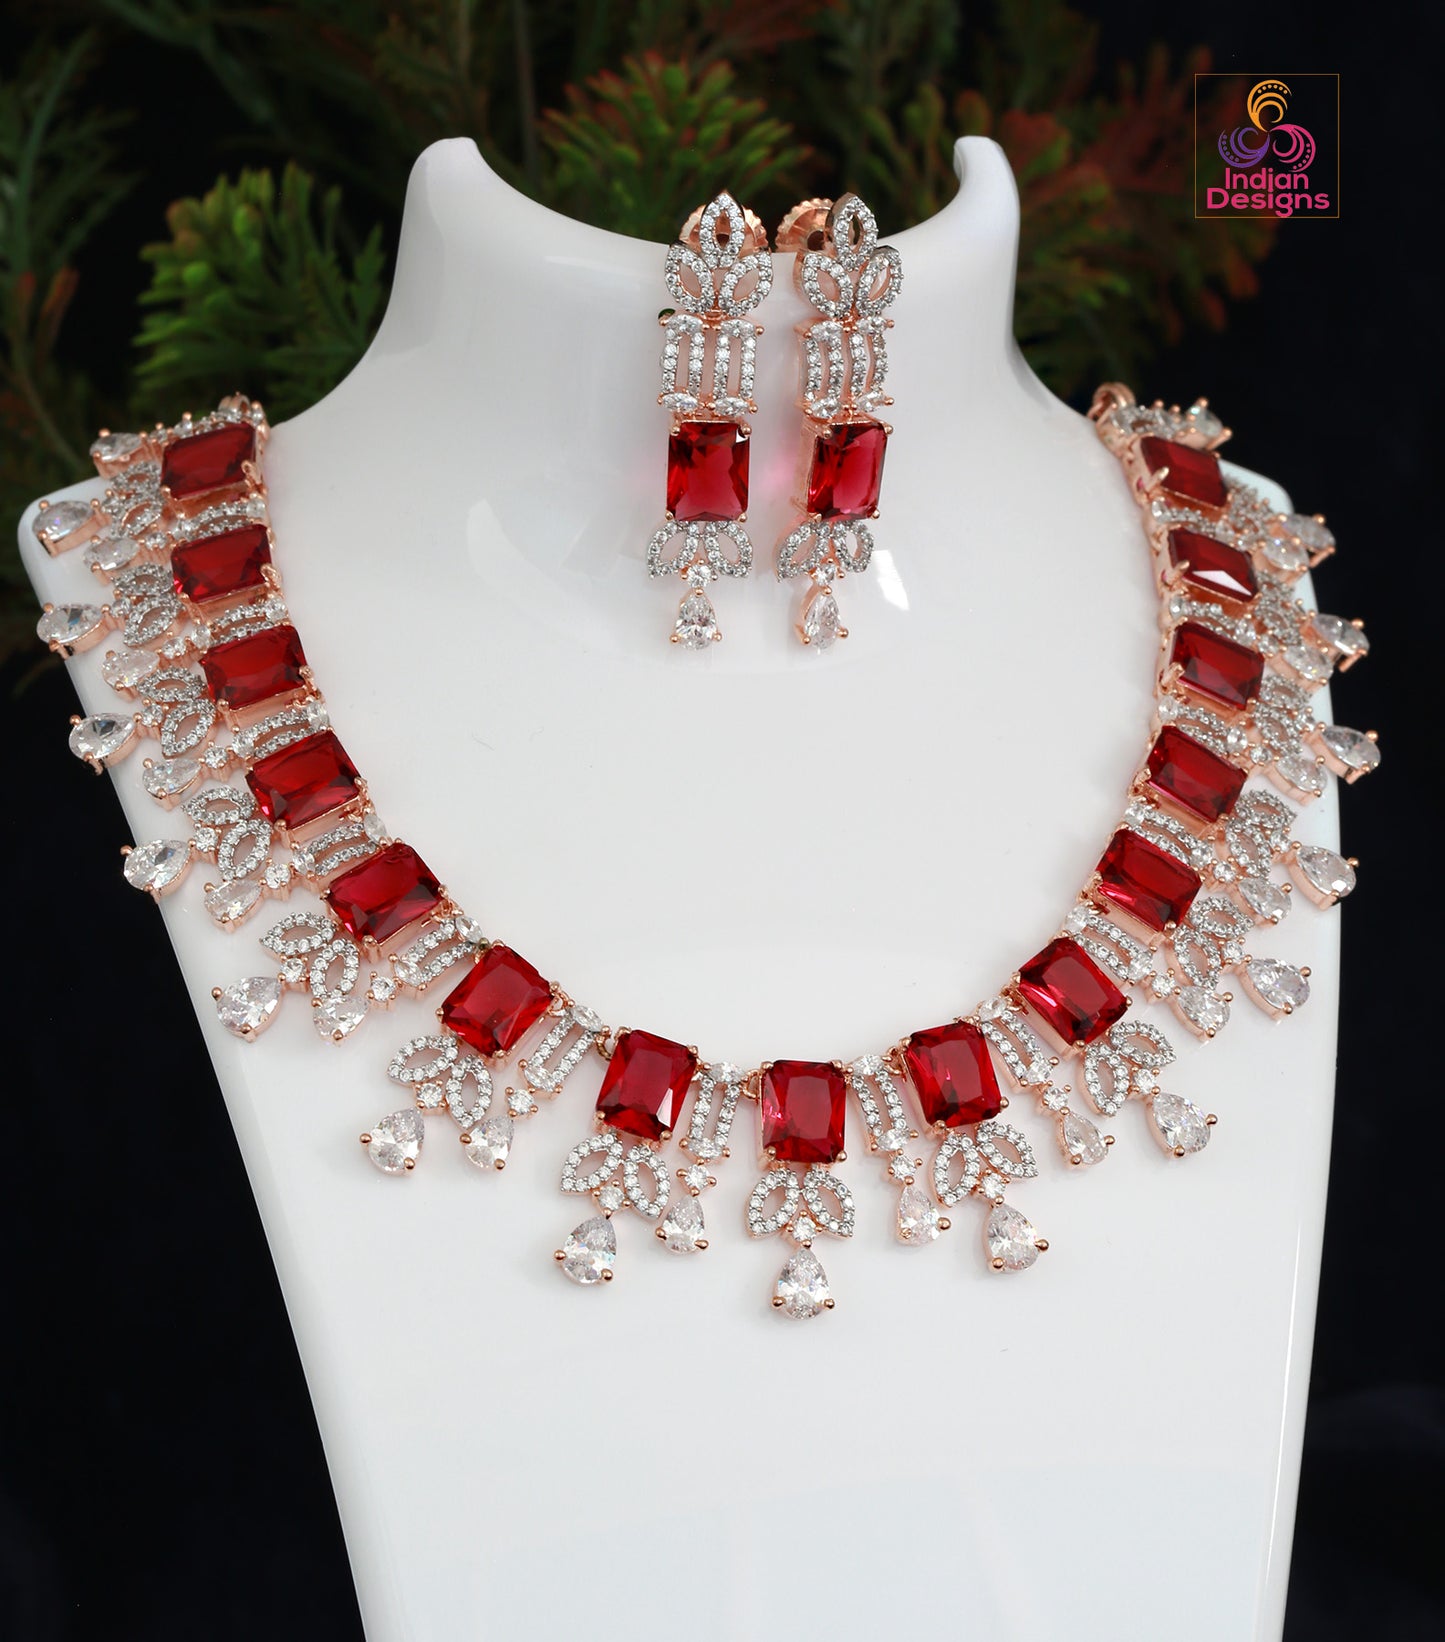 Red Stone American Diamond Necklace and Earrings Set - 22kt Gold Plated with Clear CZ Stones